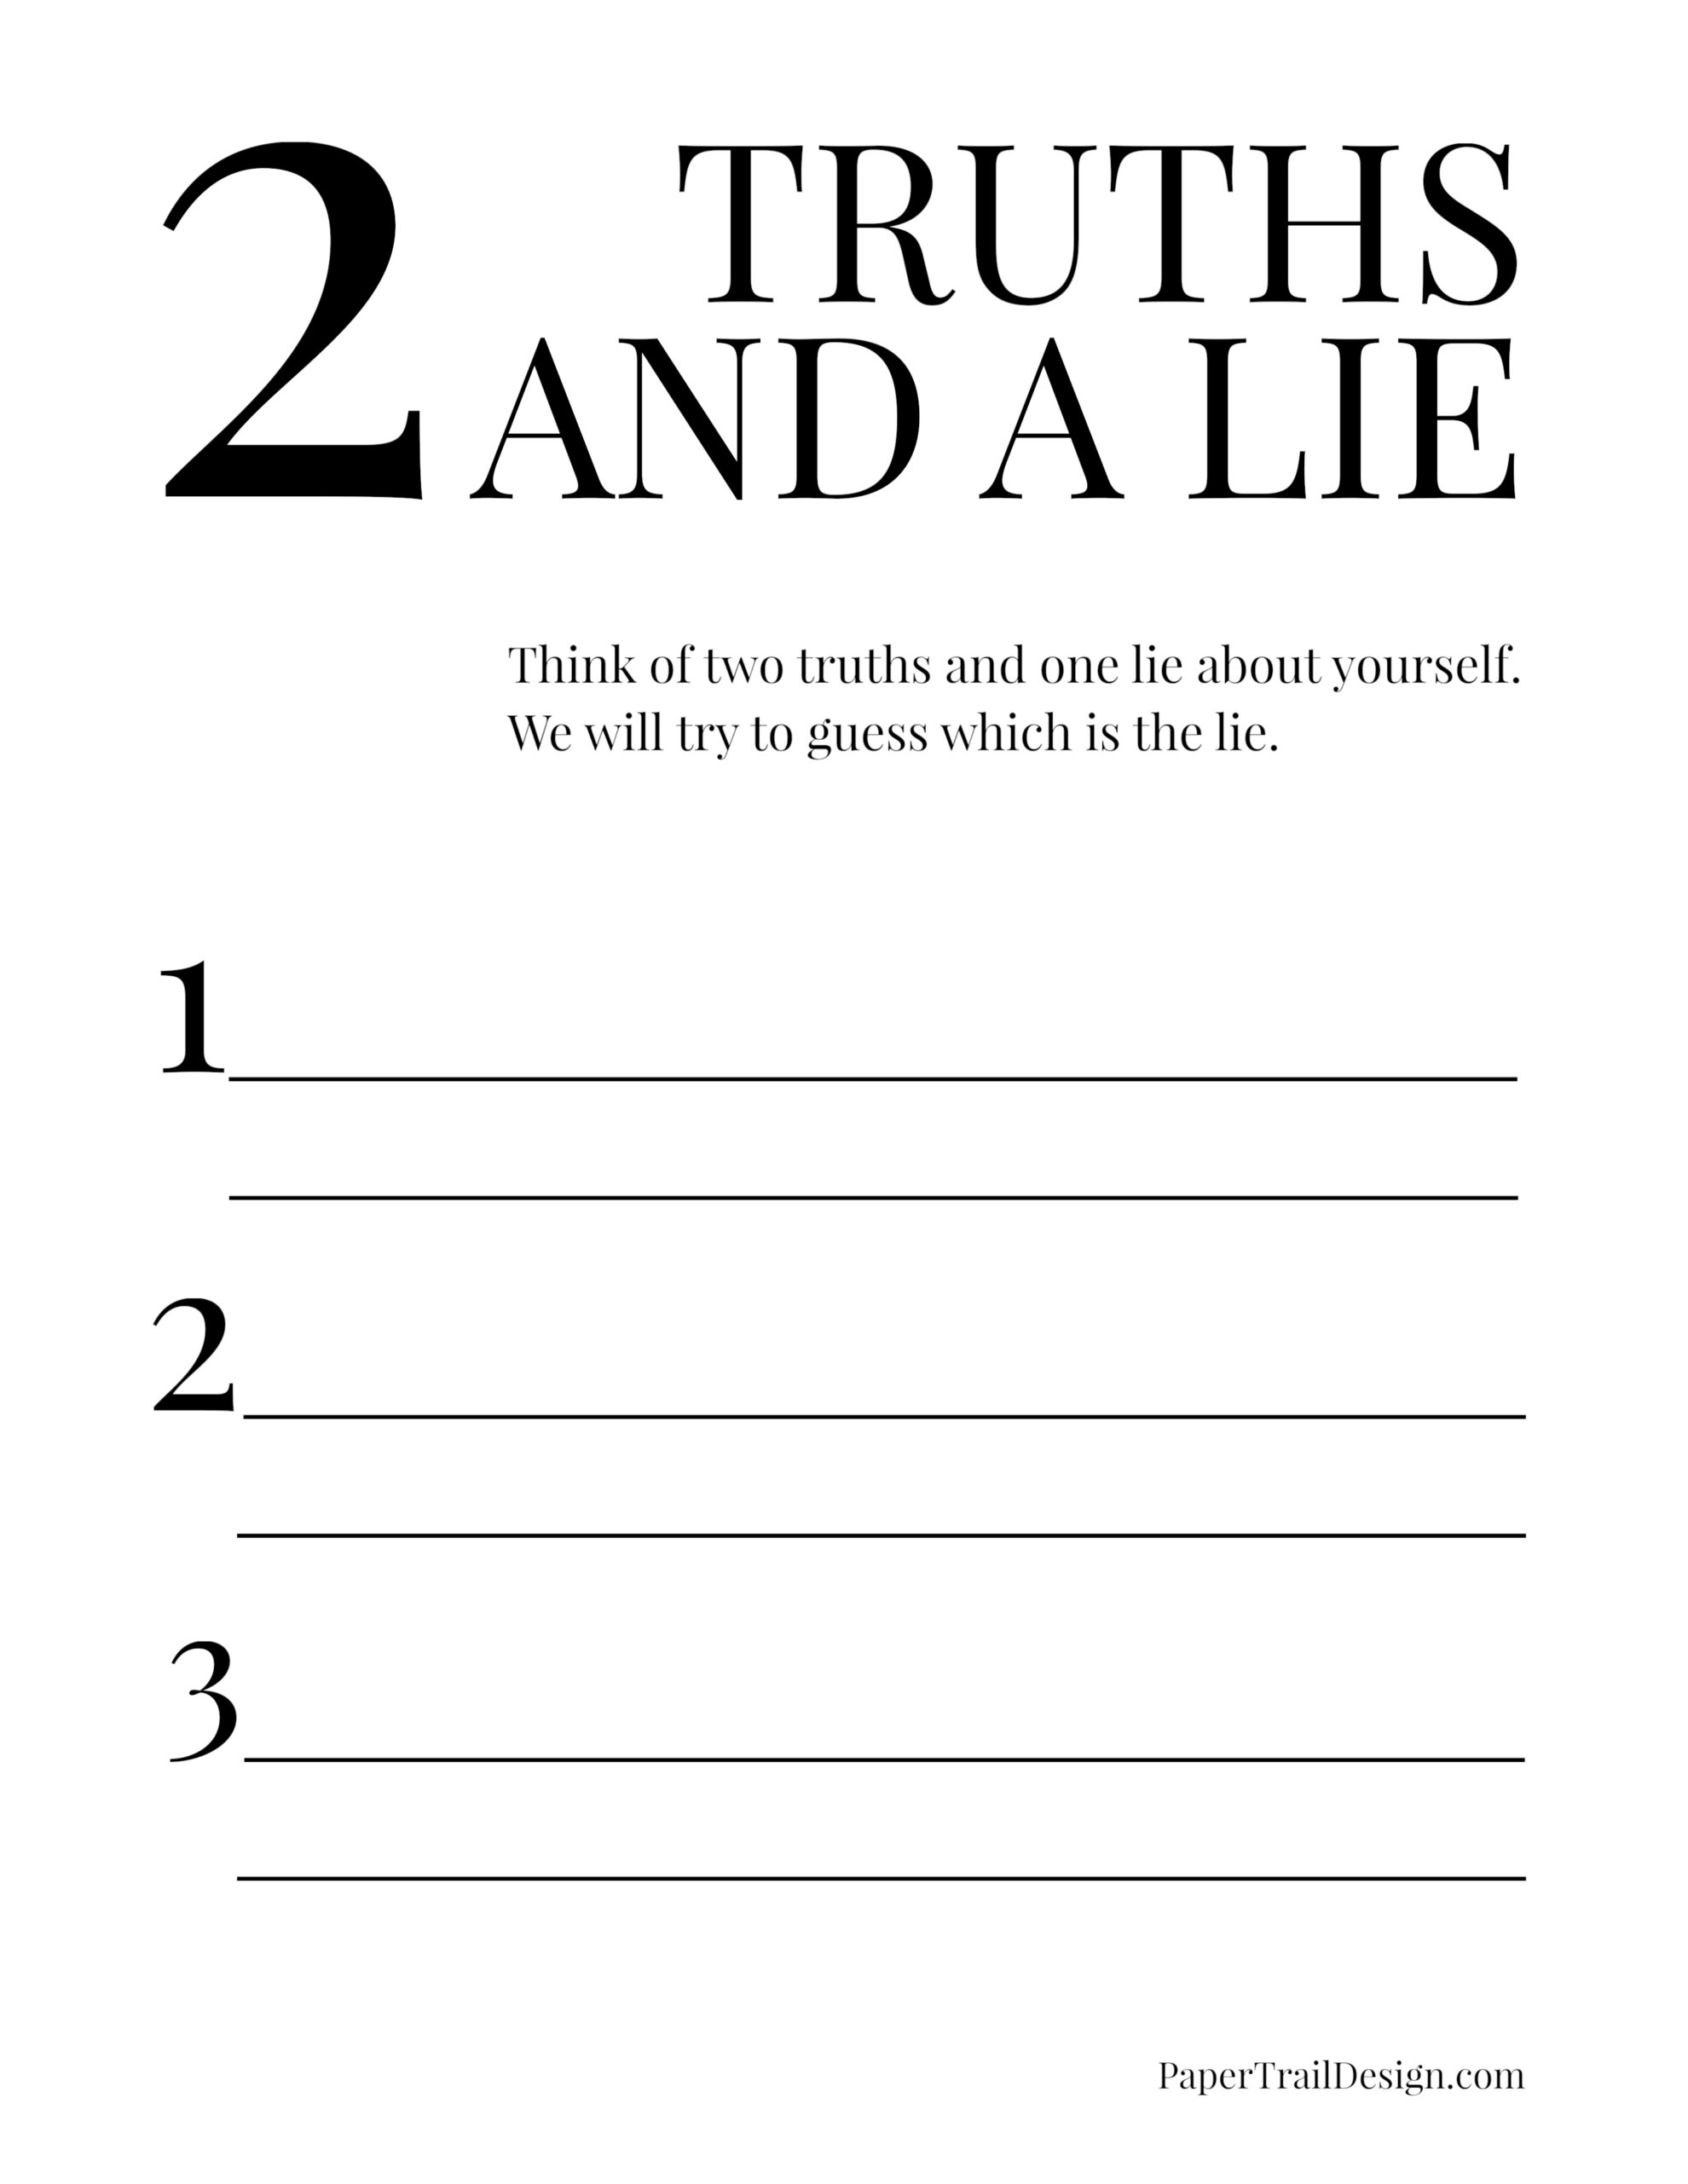 Two Truths and a Lie Game {Free Printable} Paper Trail Design